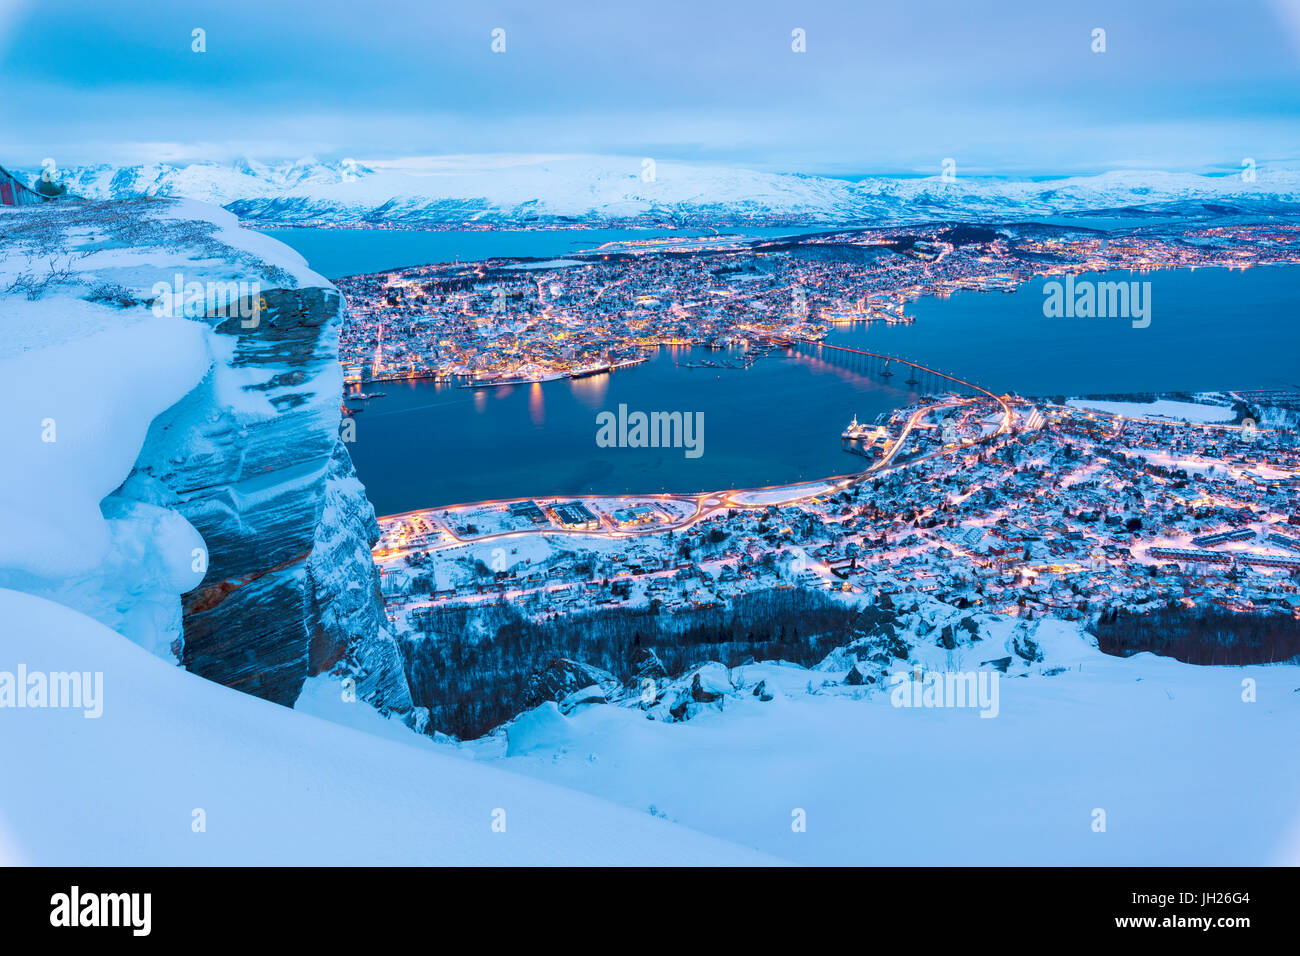 View of the city of Tromso at dusk from the mountain top reached by the Fjellheisen cable car, Troms, Northern Norway Stock Photo